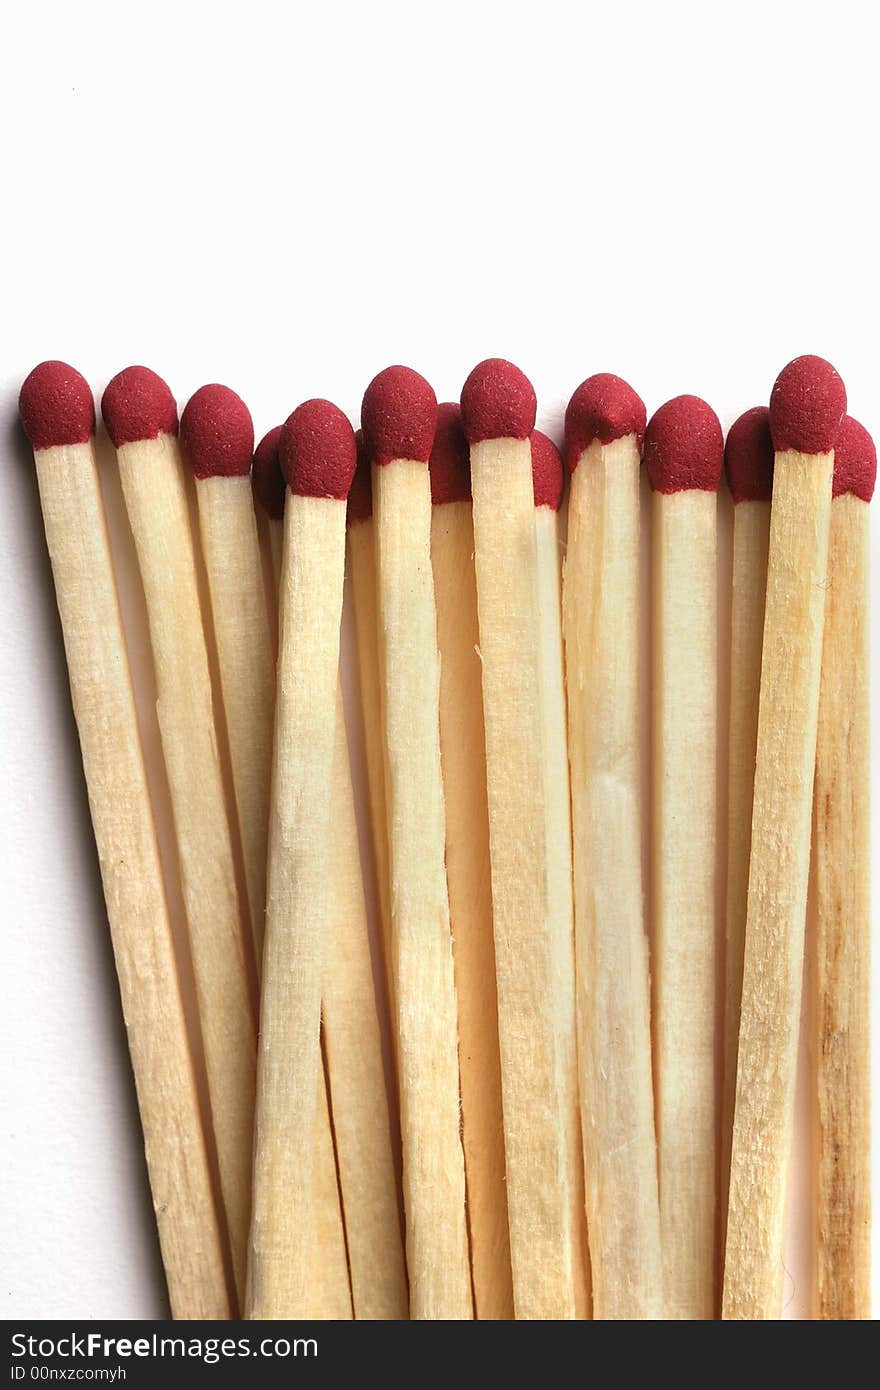 Wooden Matchsticks with red sulfur tips isolated on white background